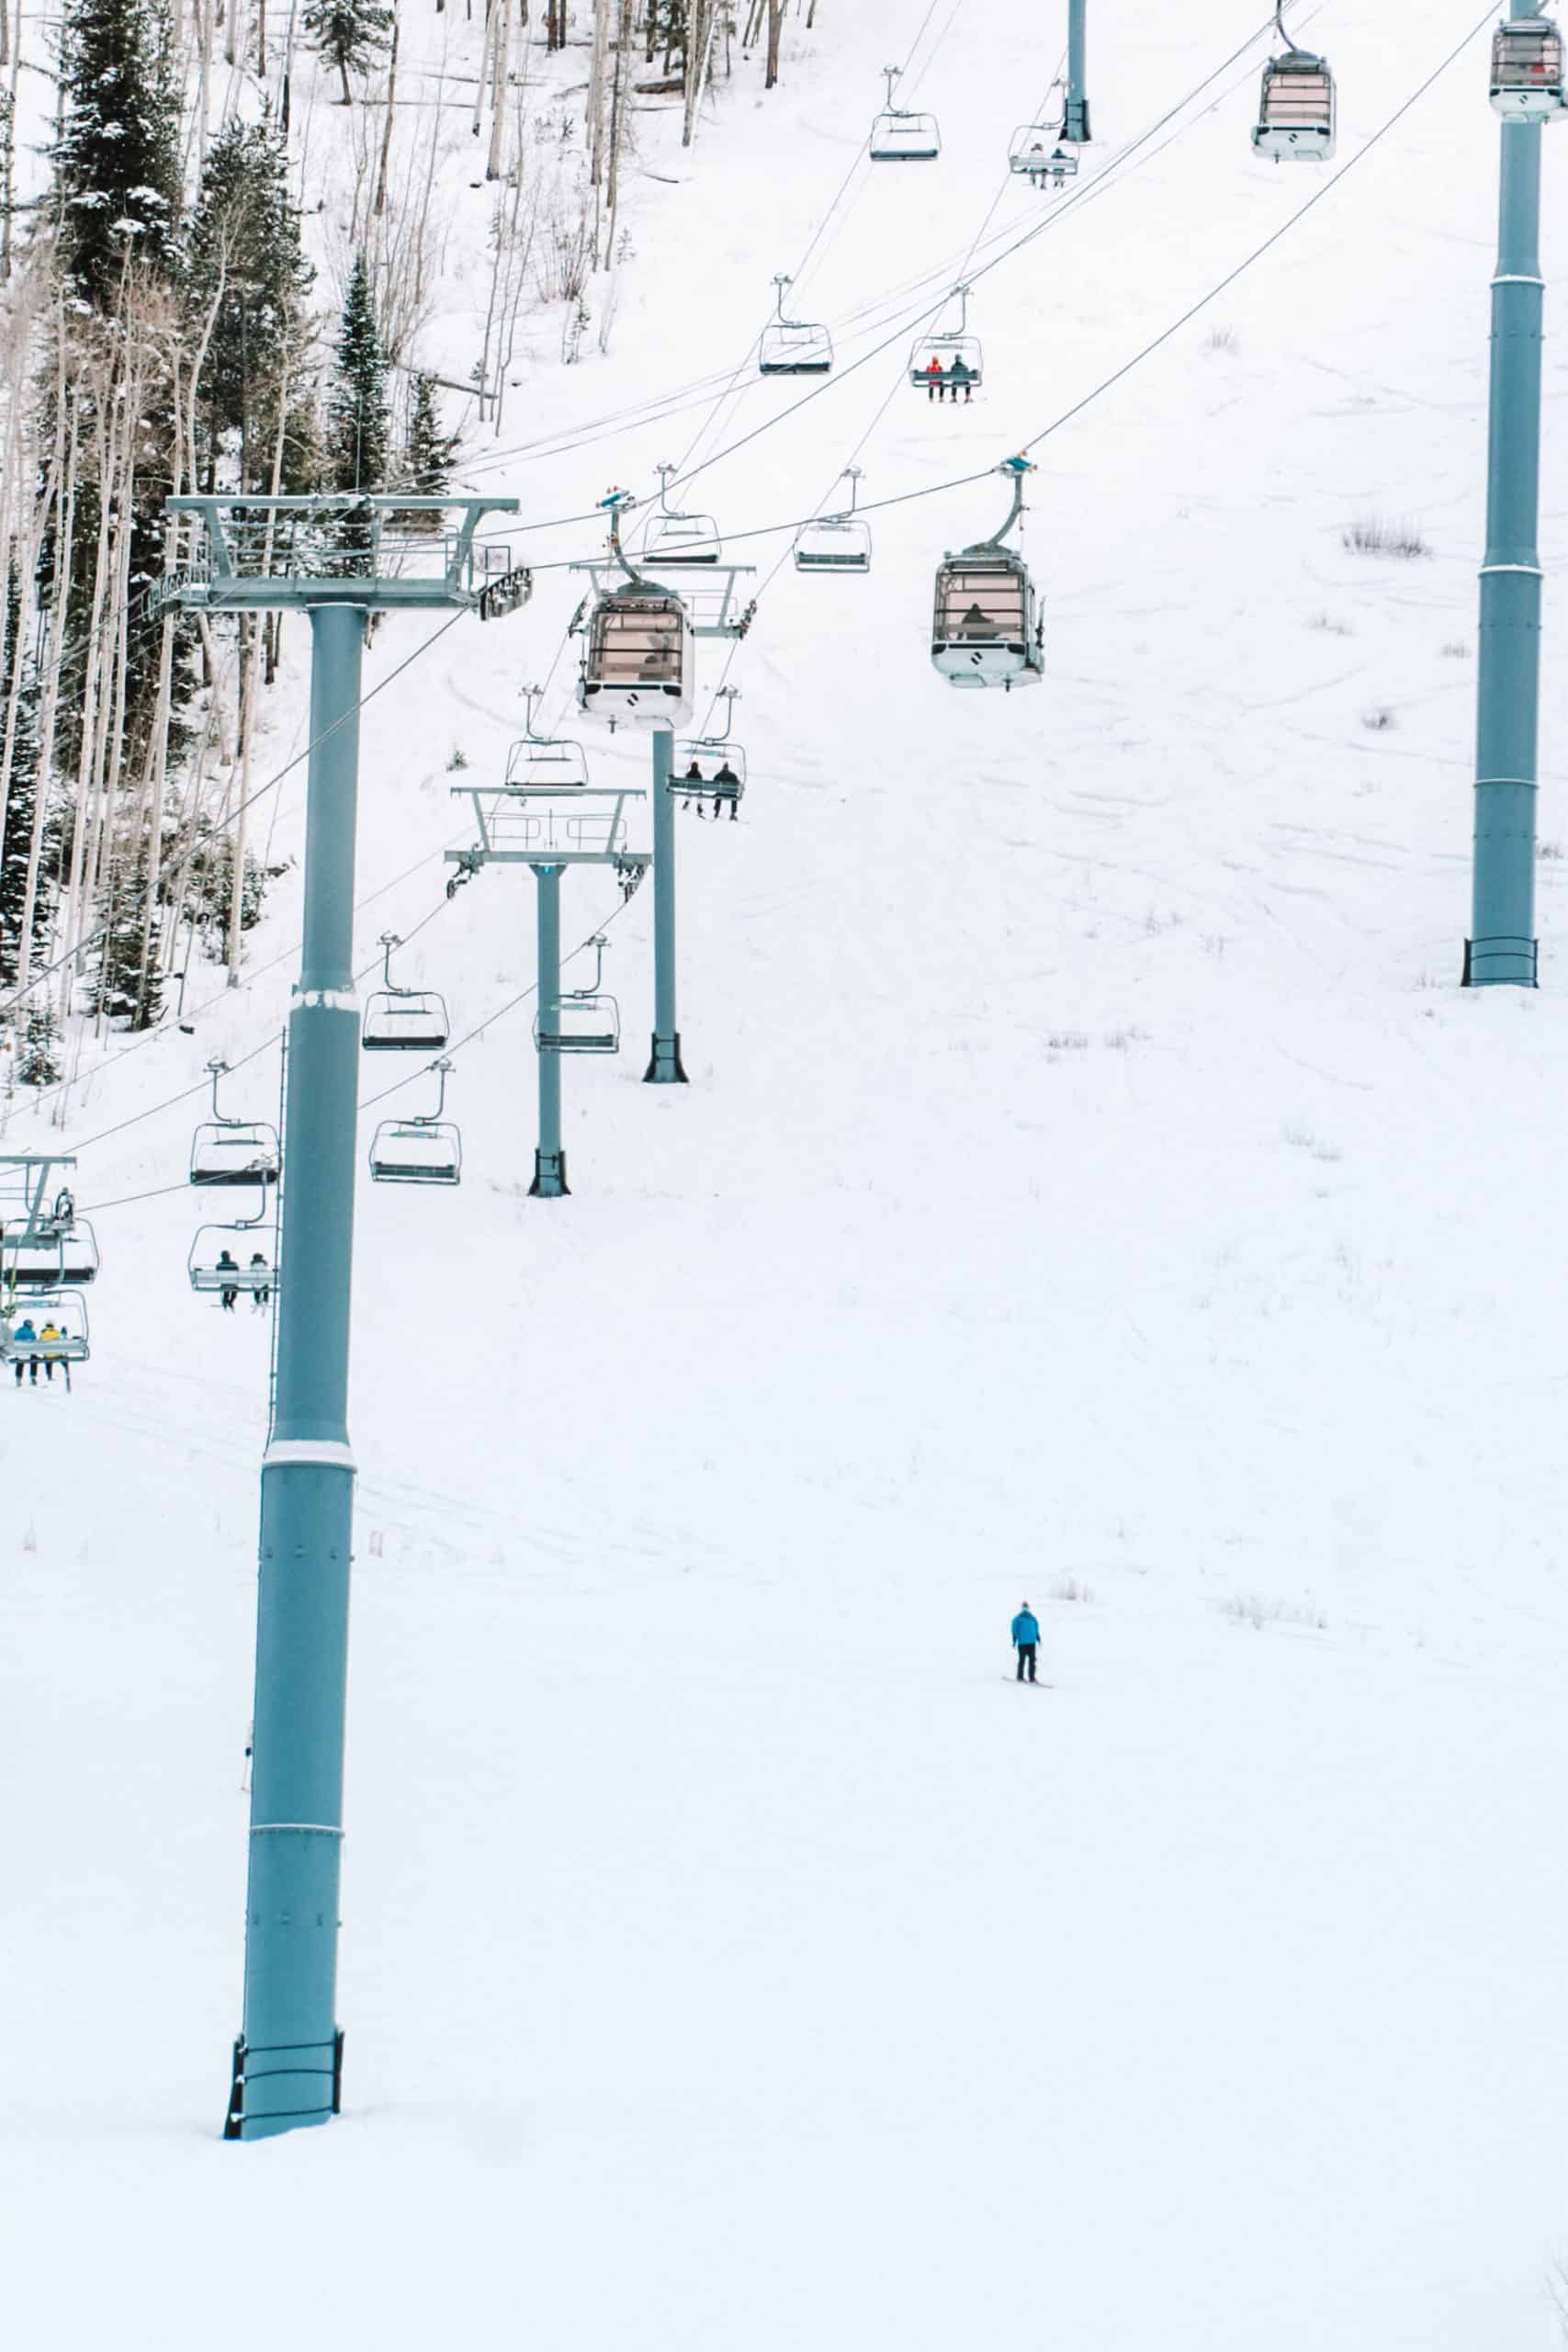 Skier on Vail mountain | The Ultimate Guide to Vail, Colorado